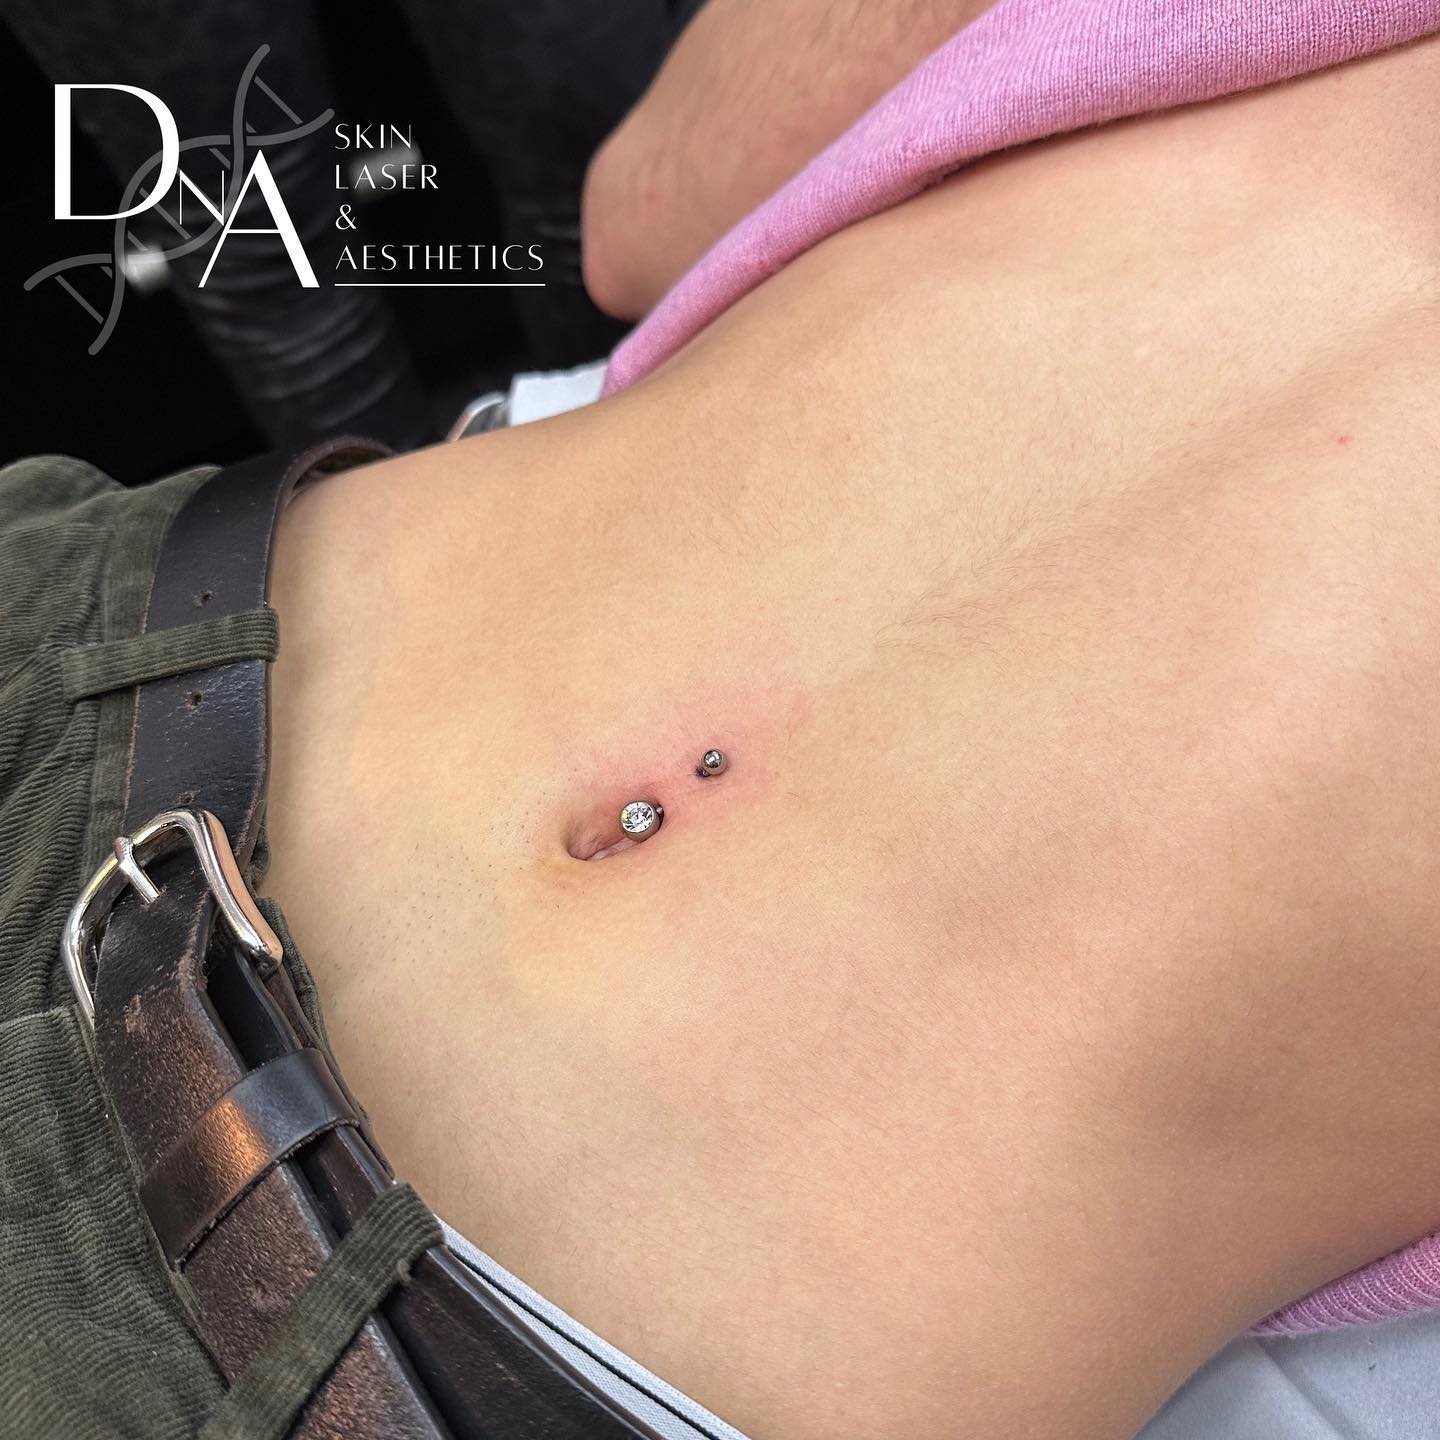 Naval Piercings At Top Aesthetics Clinic In South London